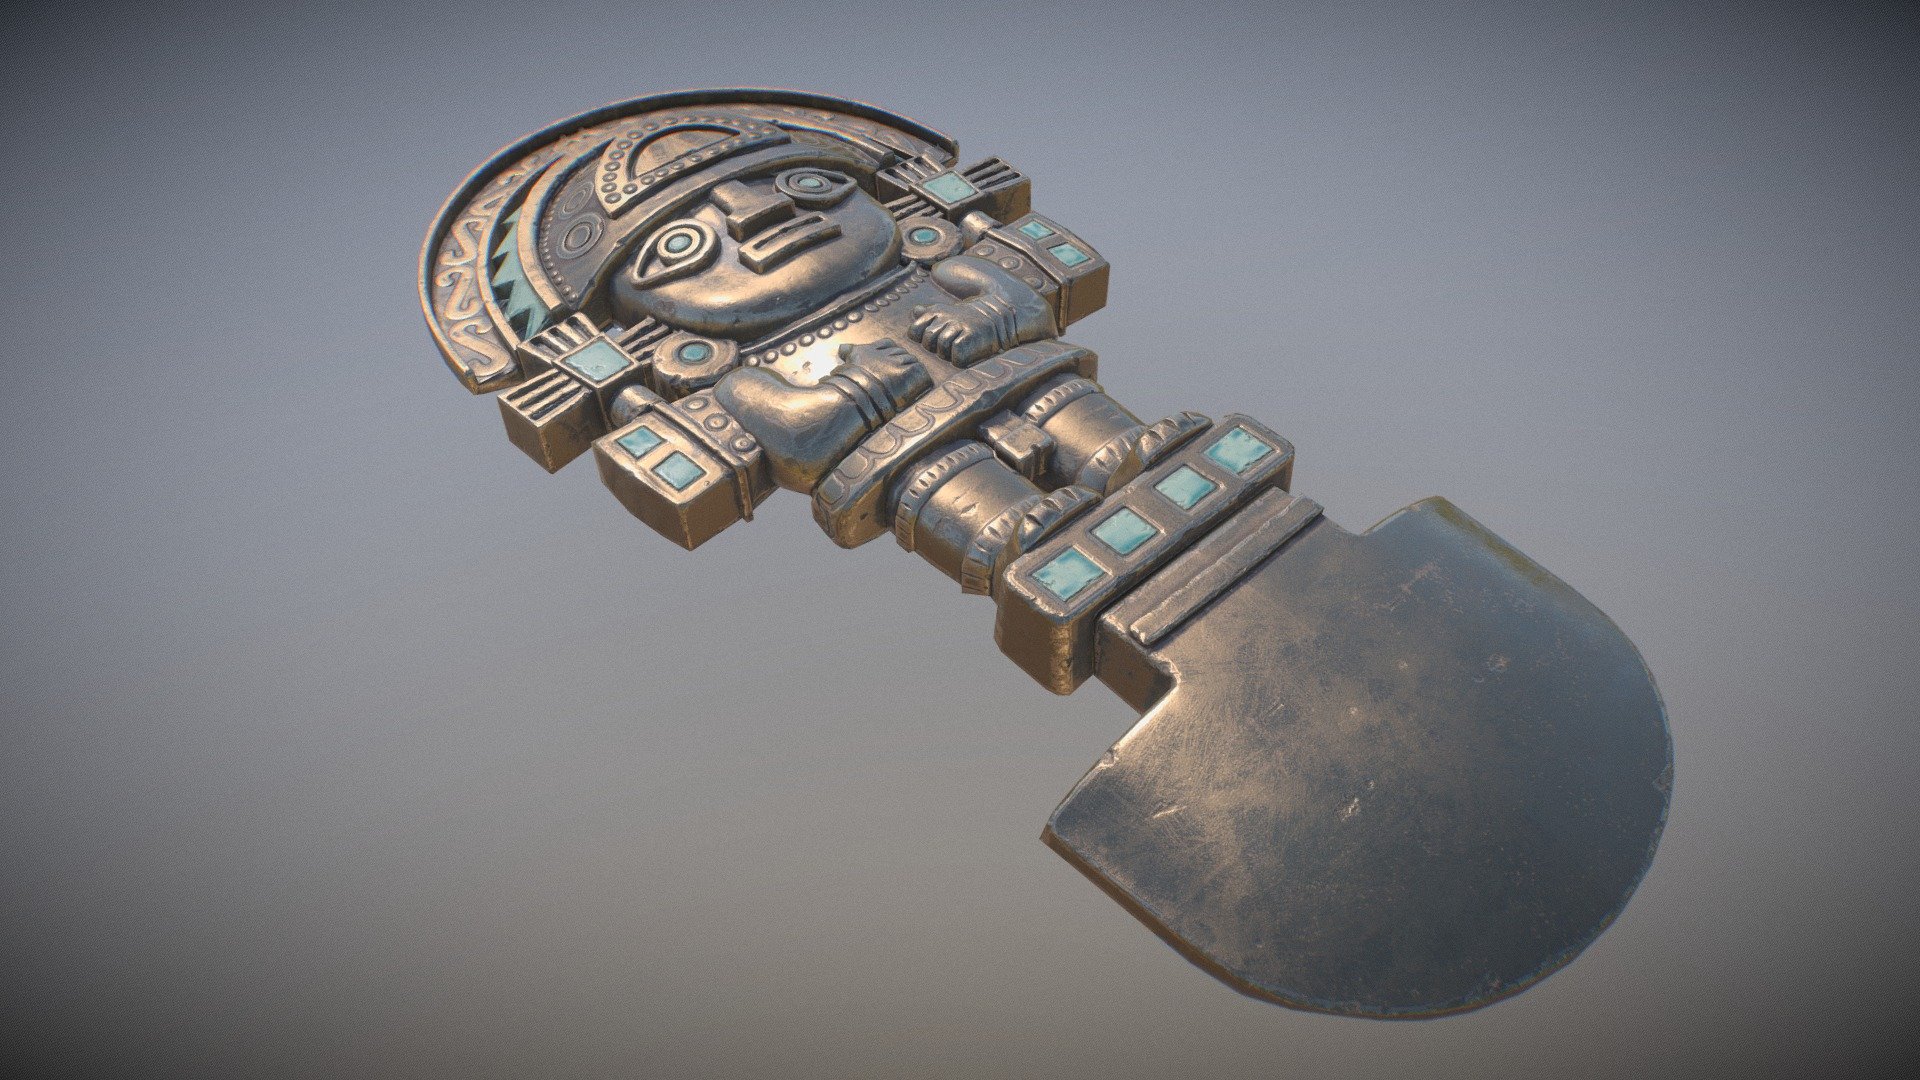 Peruvian Inti knife

A little project that I've been putting together in my spare time. 
Tumi means knife in Quechua and is one of the most famous pre-Colombian art, its a type of knife, a Peruvian sacrificial ceremonial axe used by ancient Peru and according to most the evidence represents god. 
Modeled in Maya and Zbrush, textured in substance painter 3d model